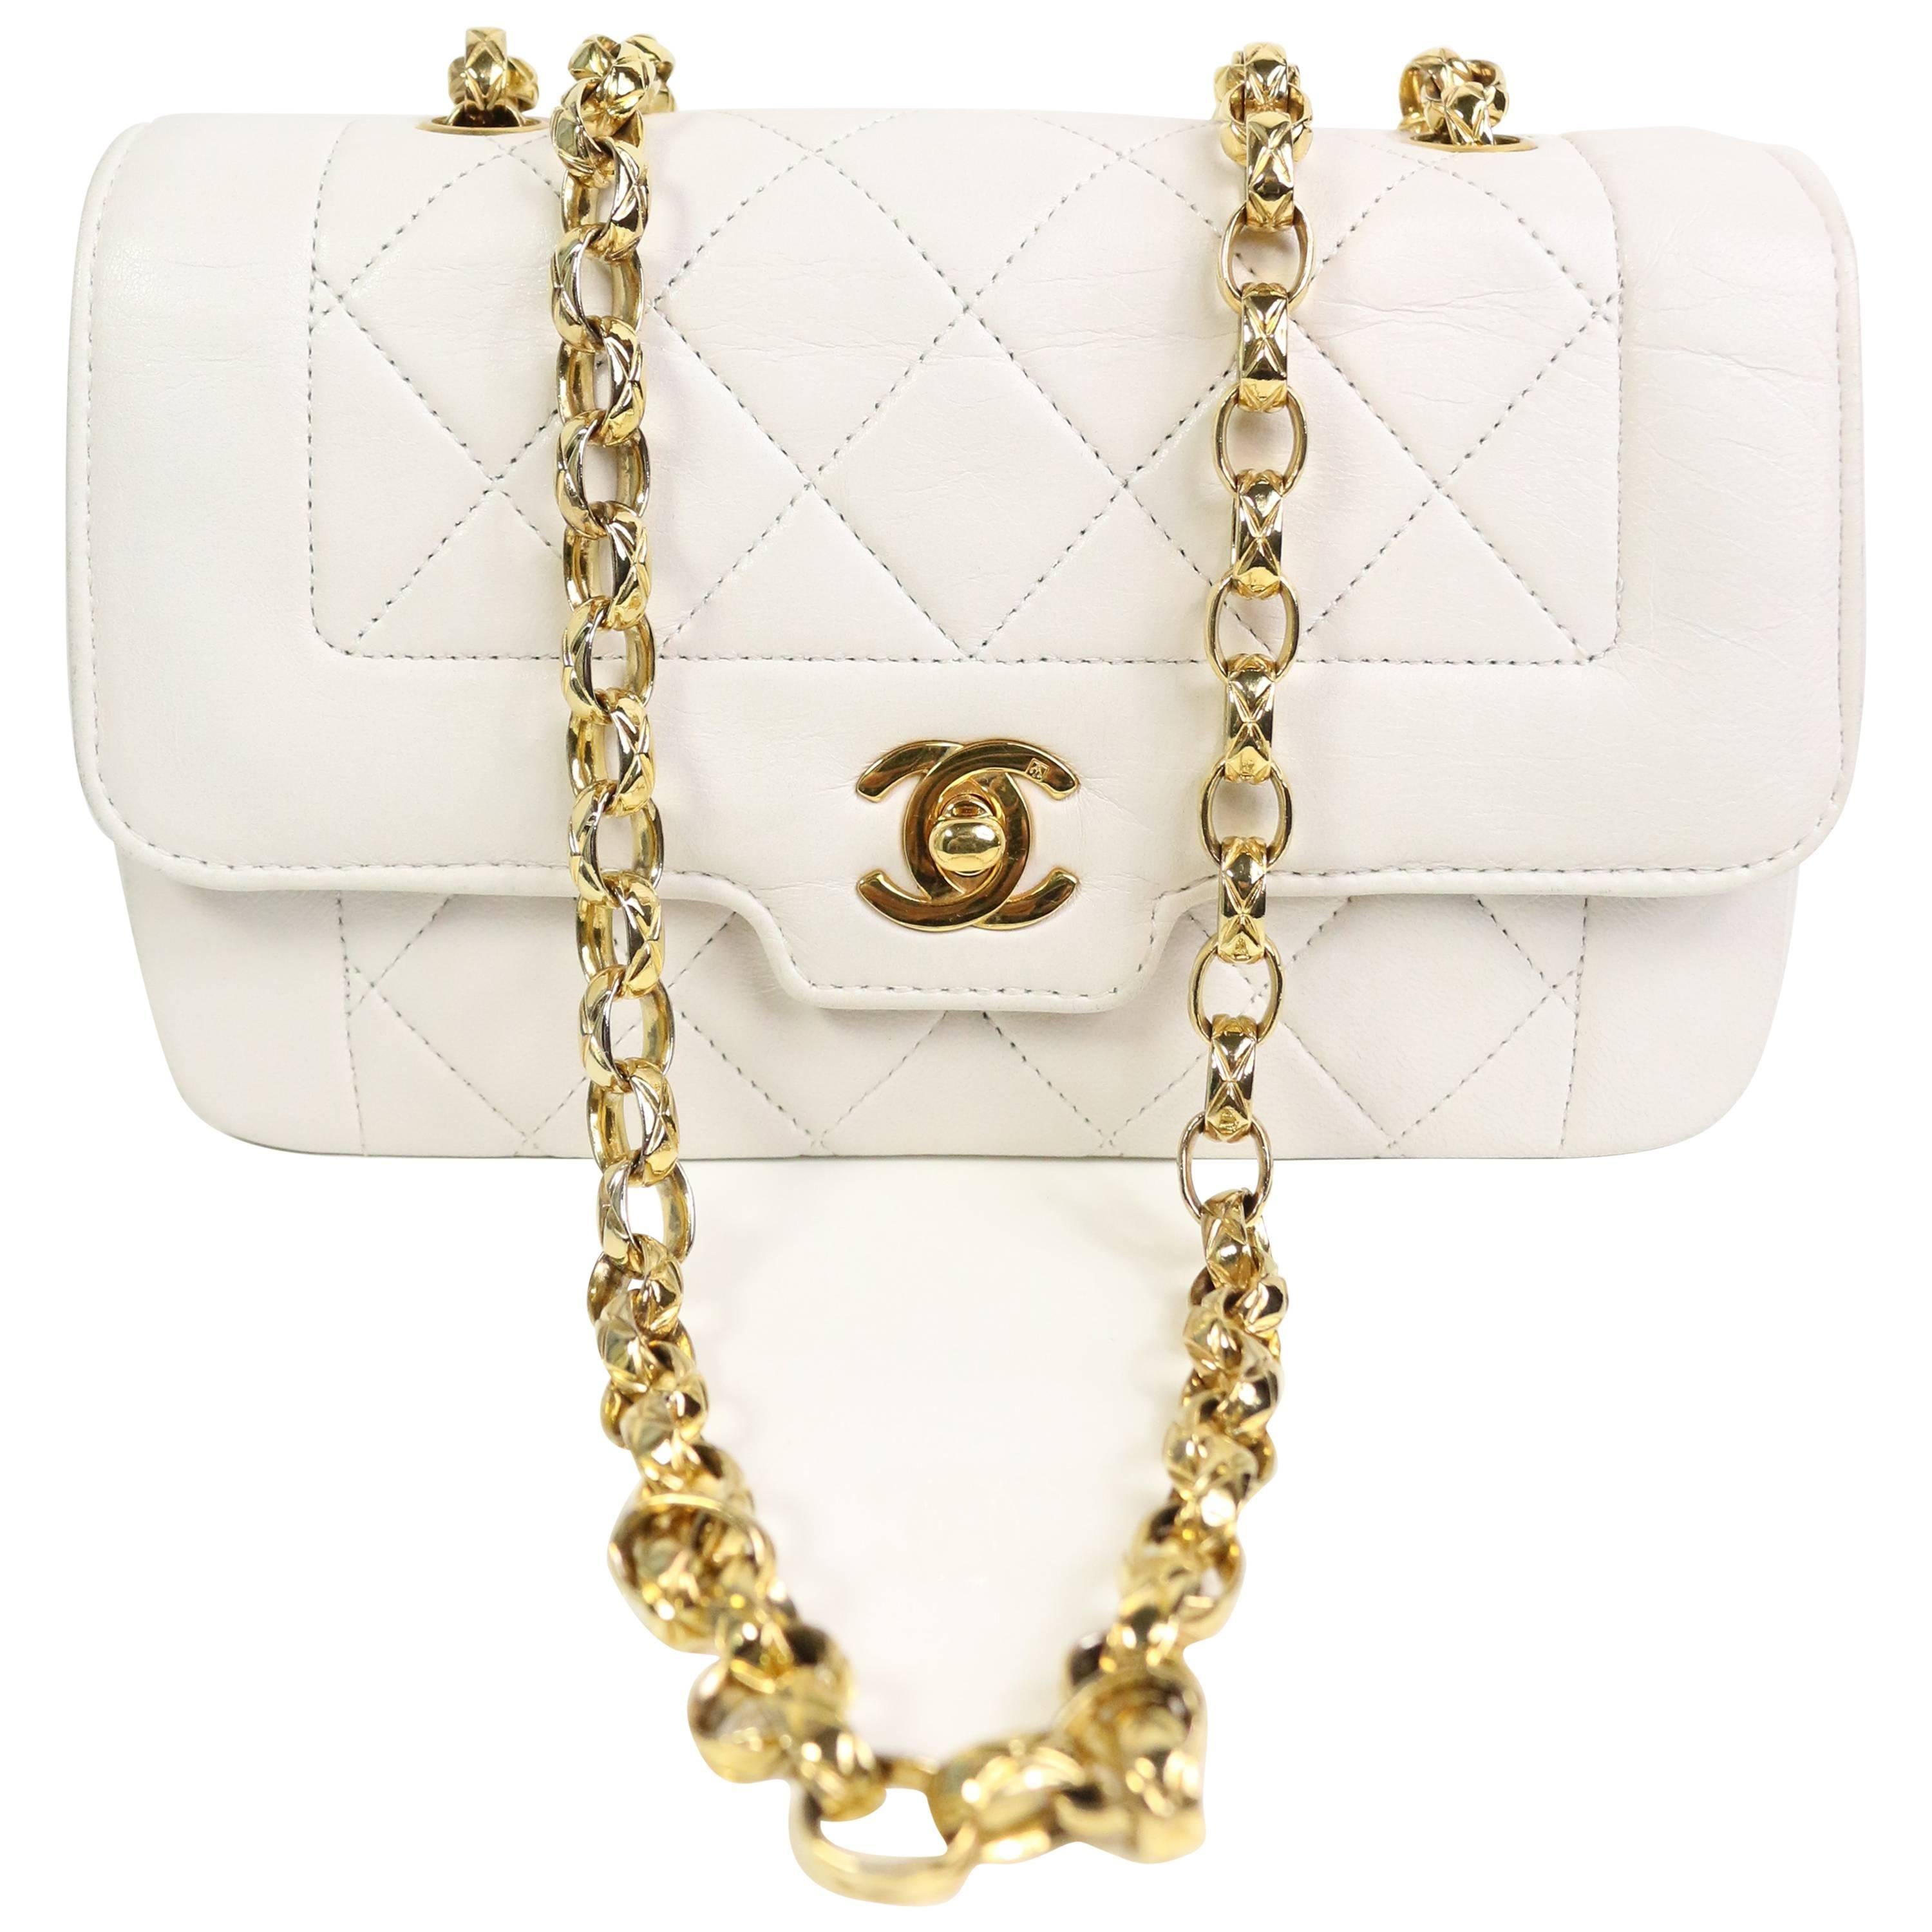 Chanel White Quilted Lambskin Mini Flap Bag with Gold Chain